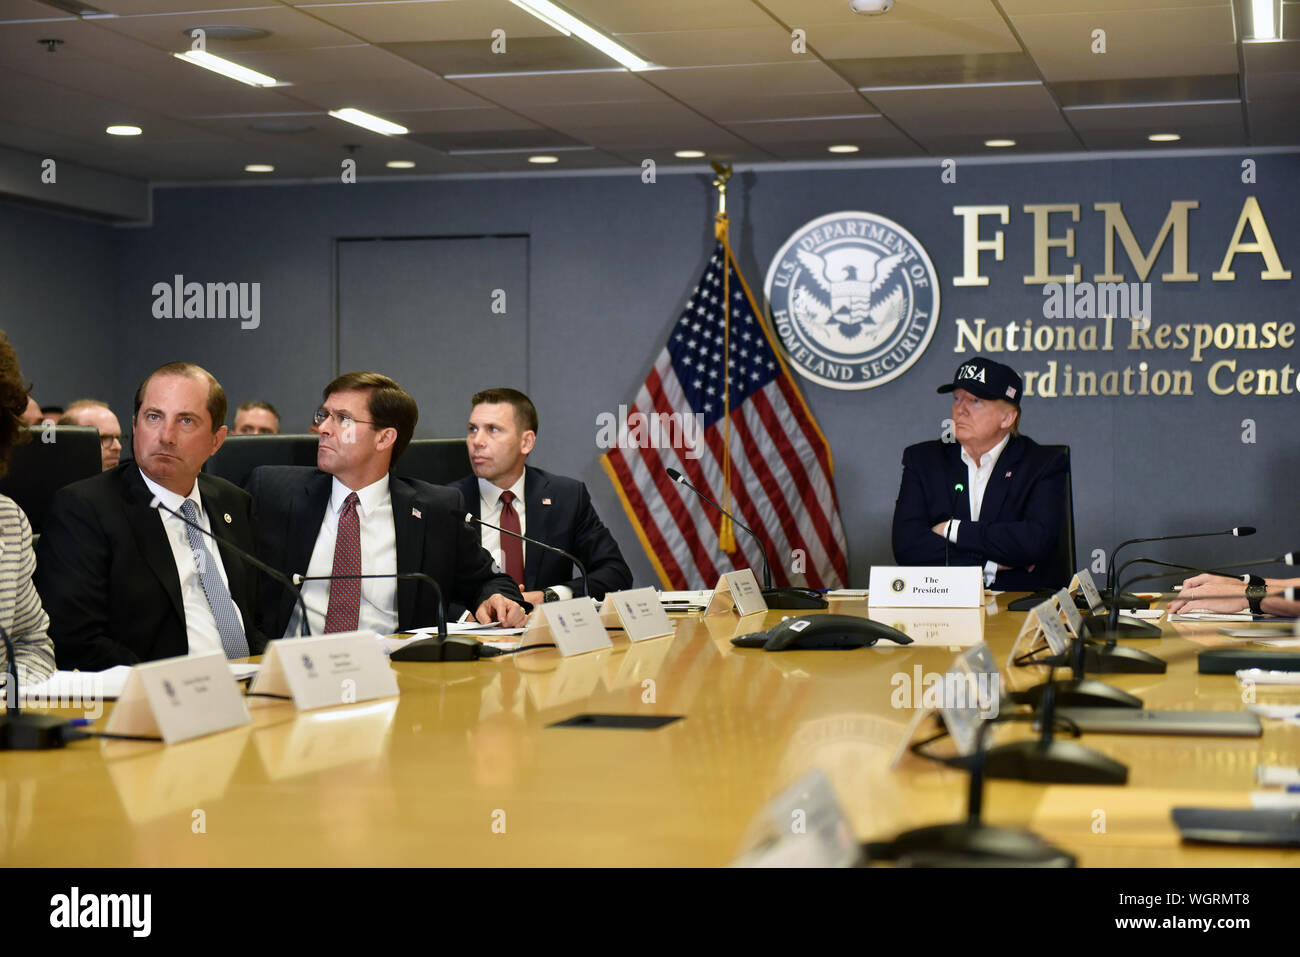 President Donald Trump leads a Hurricane Dorian briefing at the Federal  Emergency Management Agency, Washington, D.C., Sept. 1, 2019. (U.S. Army  National Guard photo by Sgt. 1st Class Jim Greenhill Stock Photo - Alamy